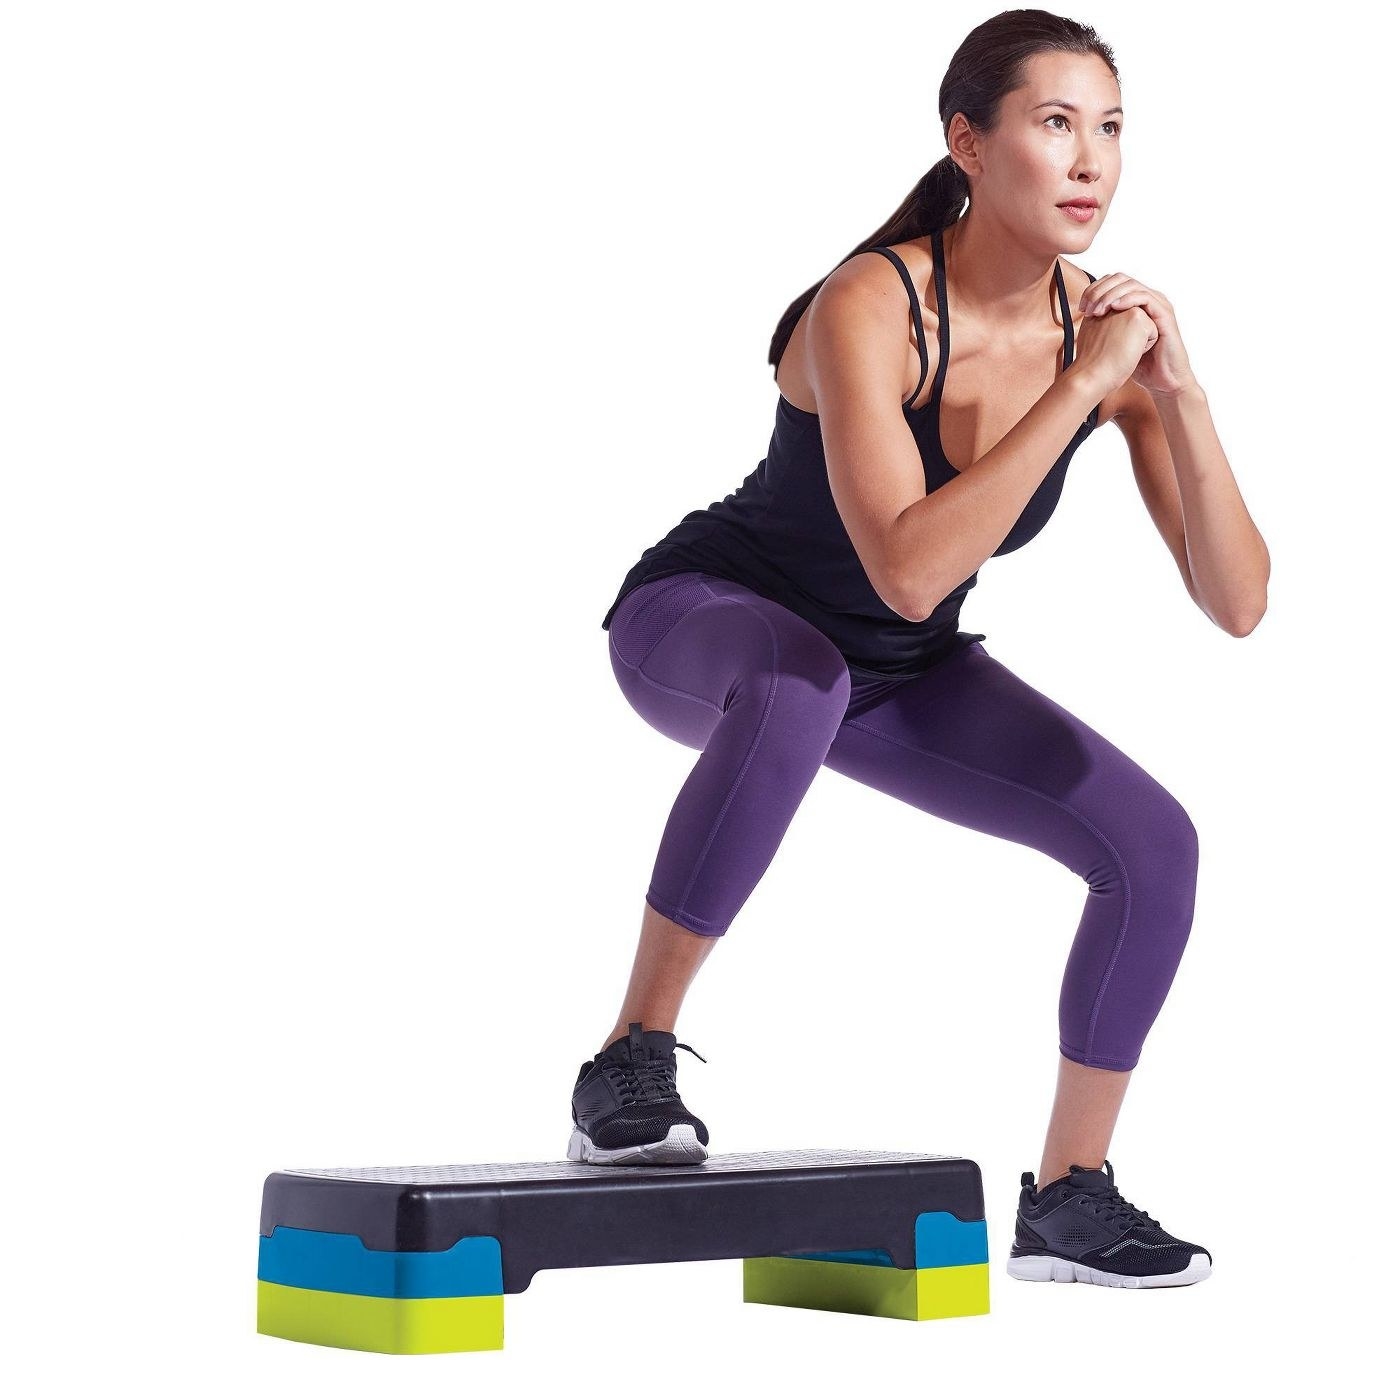 A woman does jump squats on an adjustable step deck